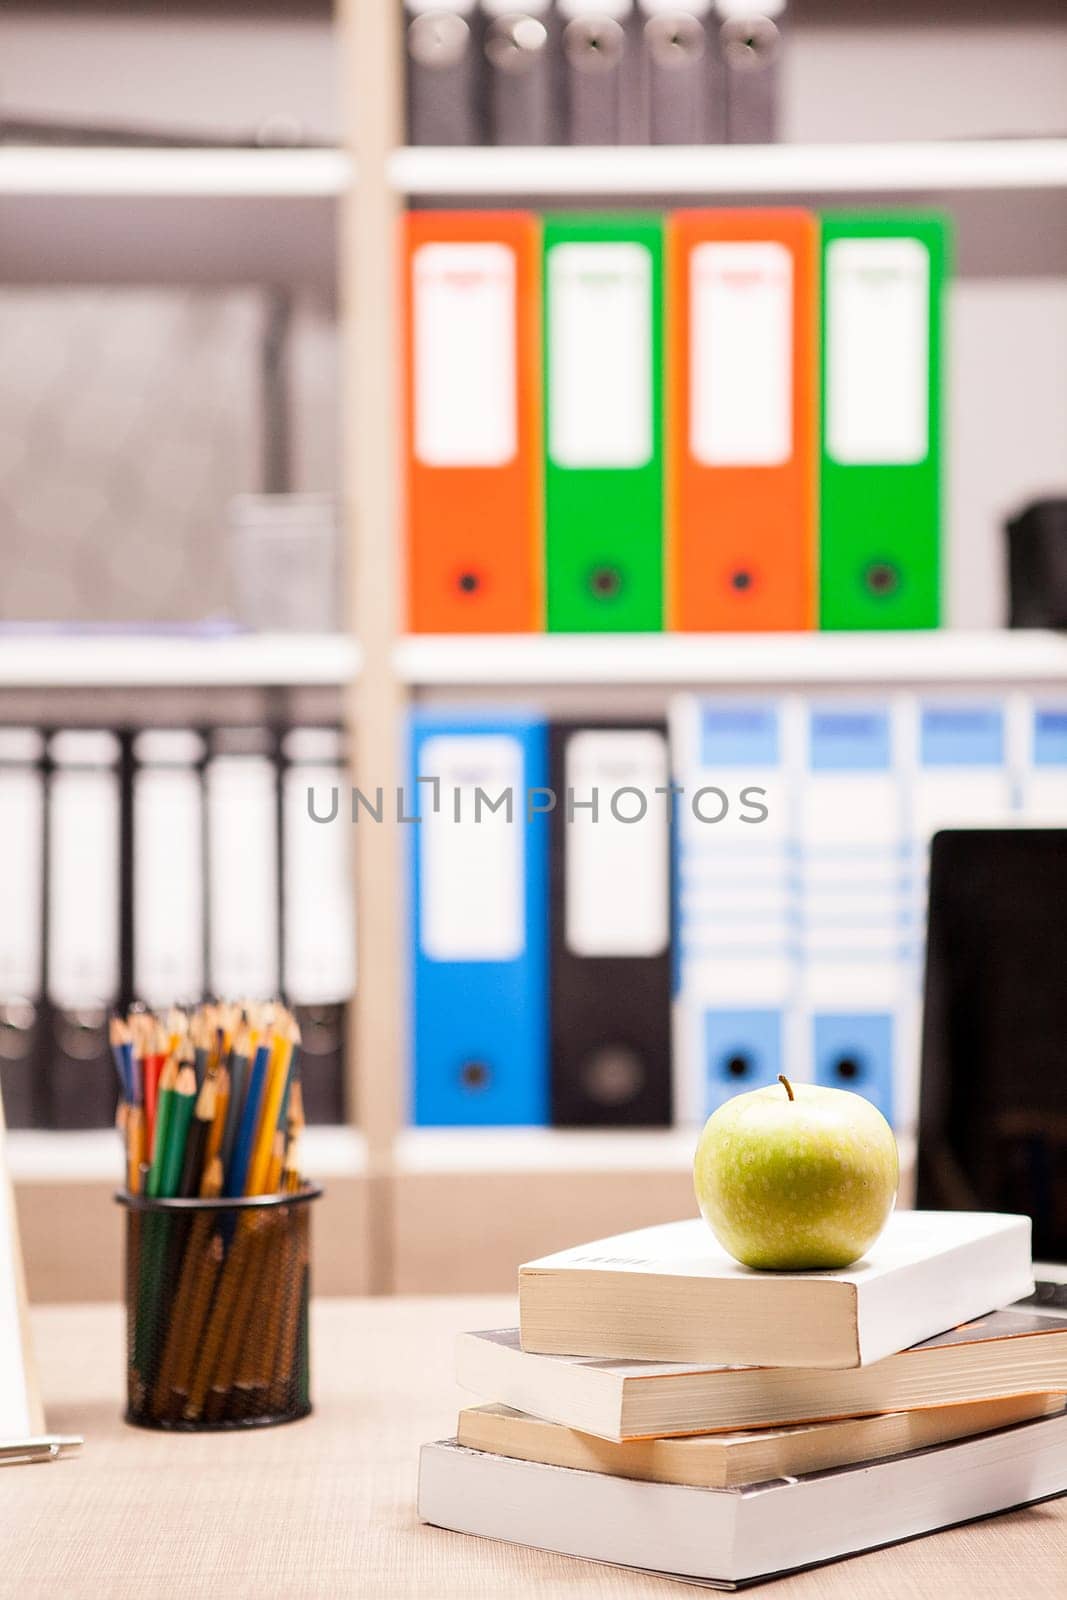 Green apple on pile of books next to a notebook and pencils on table with a blurred white board in the back. School concept